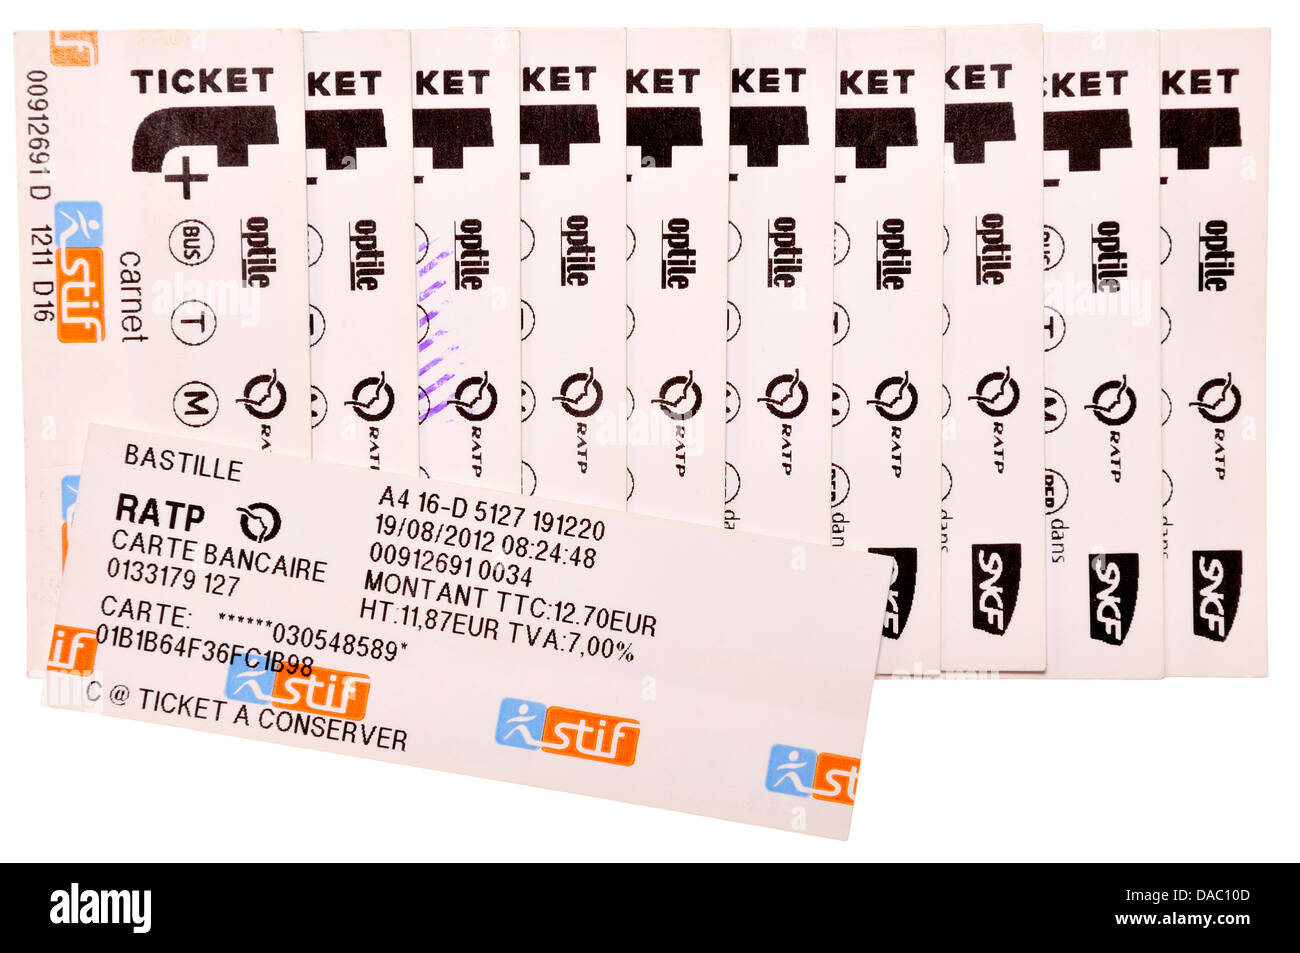 Paris metro tickets. A 'carnet' - 10 tickets bought together at discount,  with receipt Stock Photo - Alamy